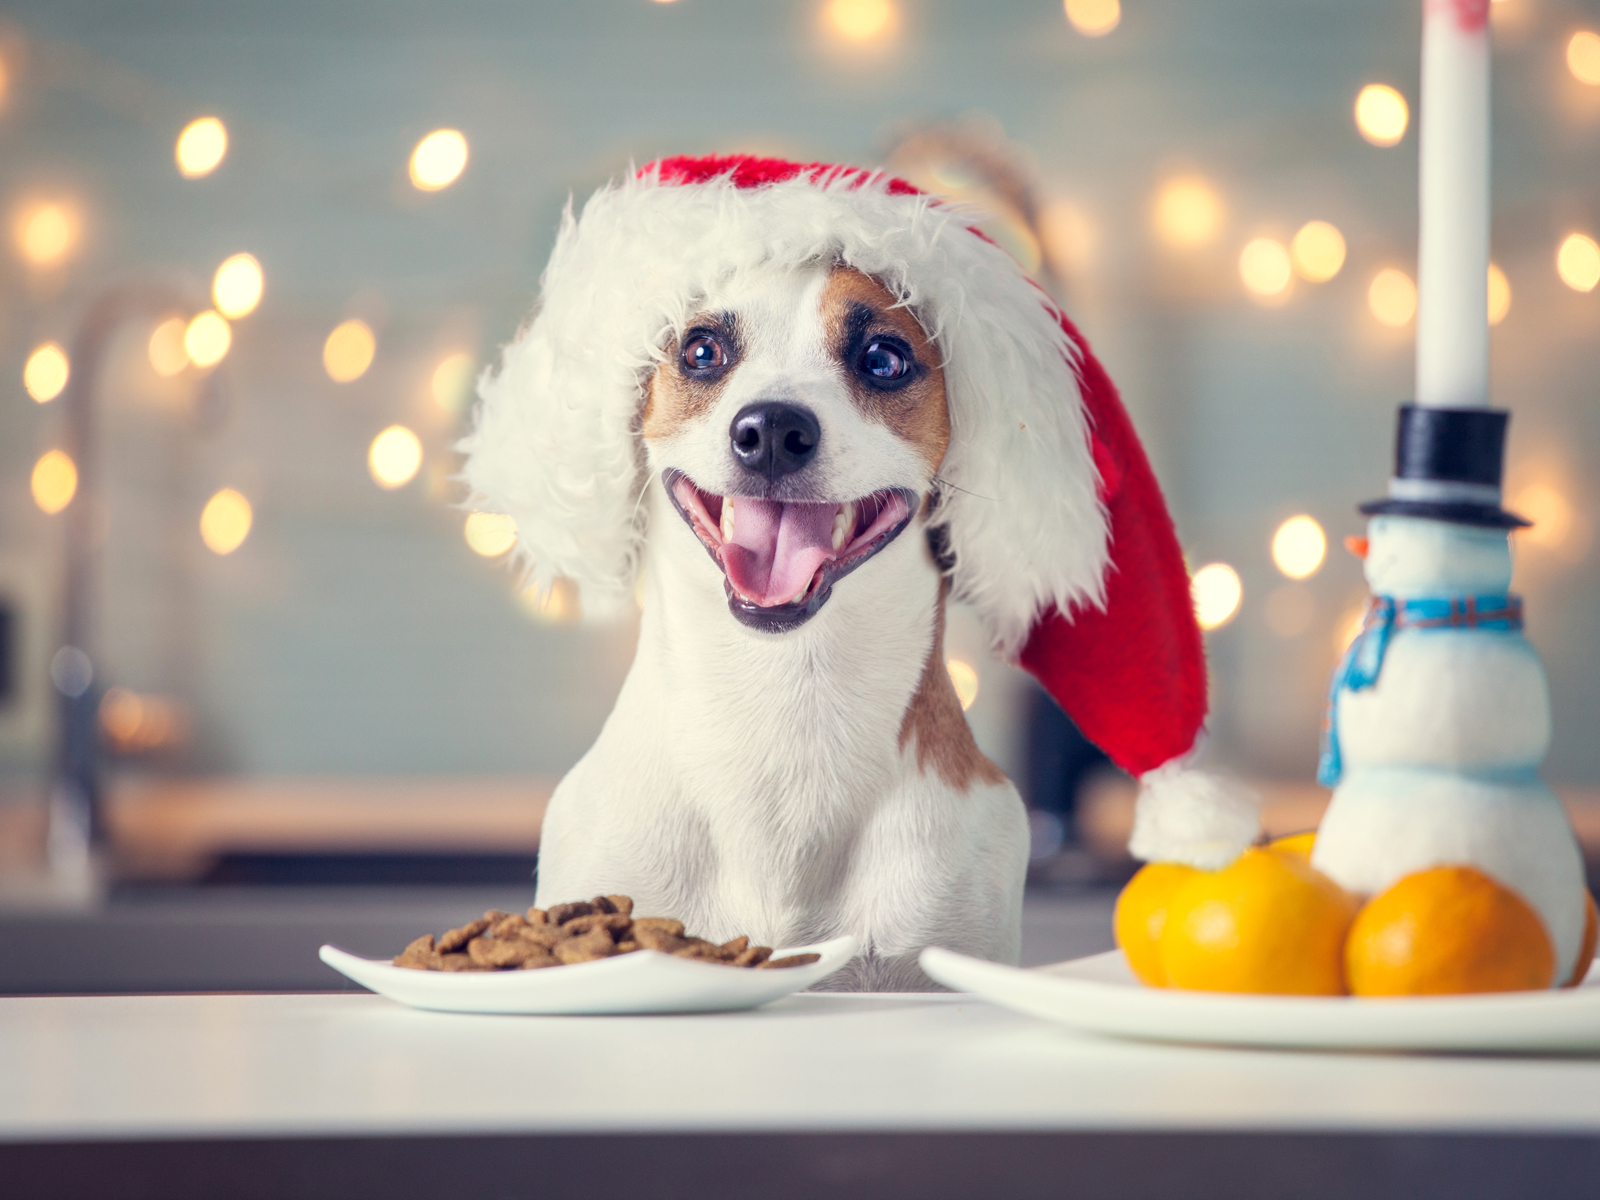 A dog wearing a Santa hat with a bowl of biscuits in-front